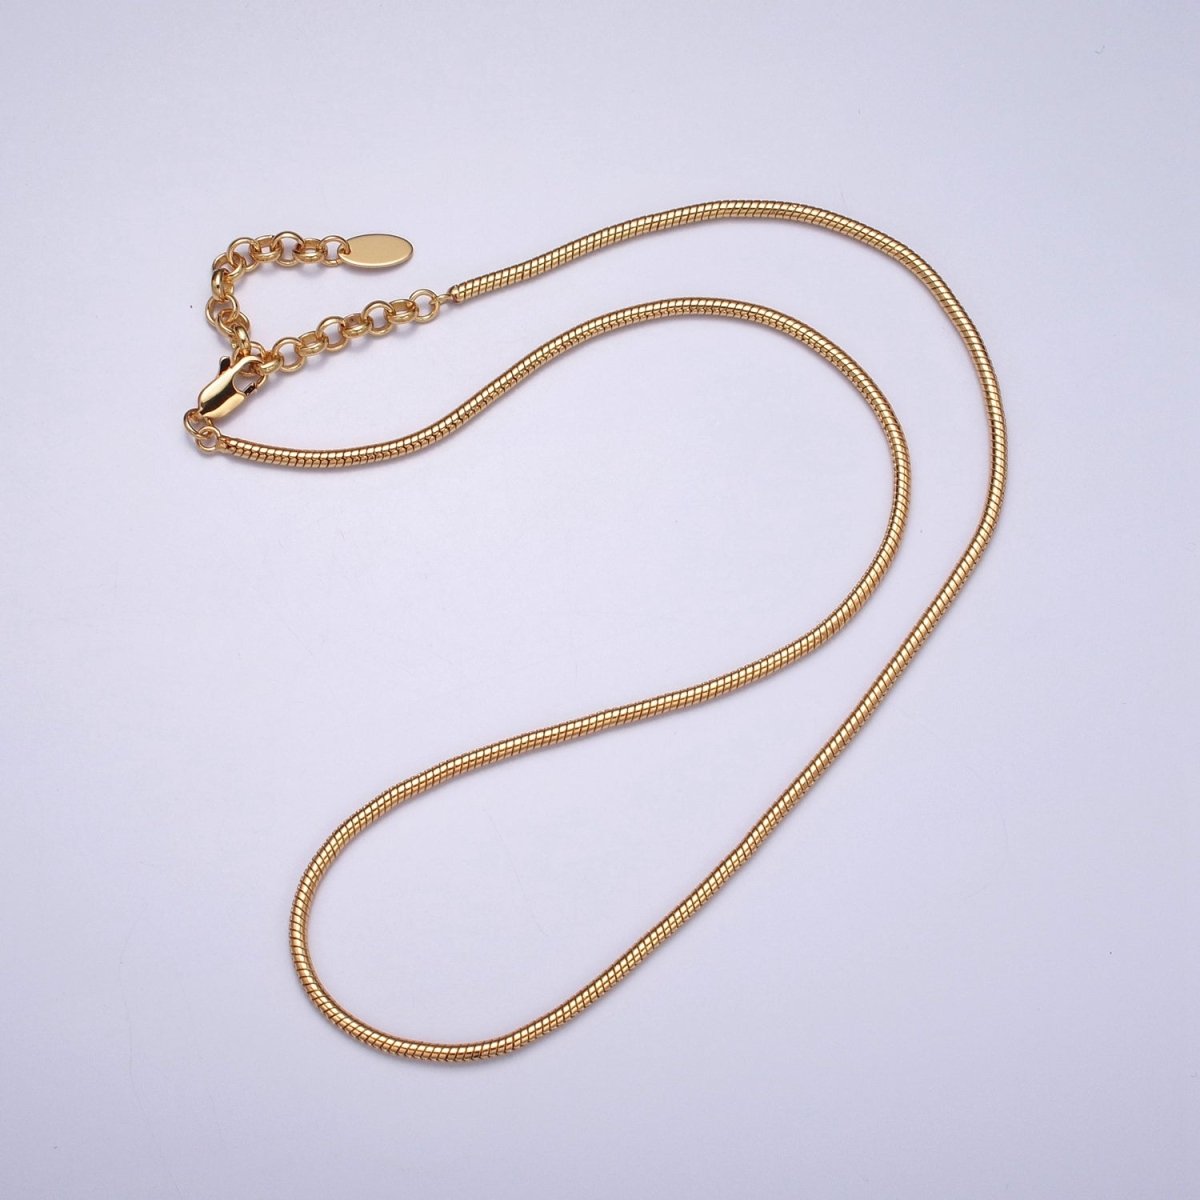 24K Gold Filled 18.5 Inch Cocoon Snake Finished Chain Necklace | WA-1010 WA-1011 Clearance Pricing - DLUXCA